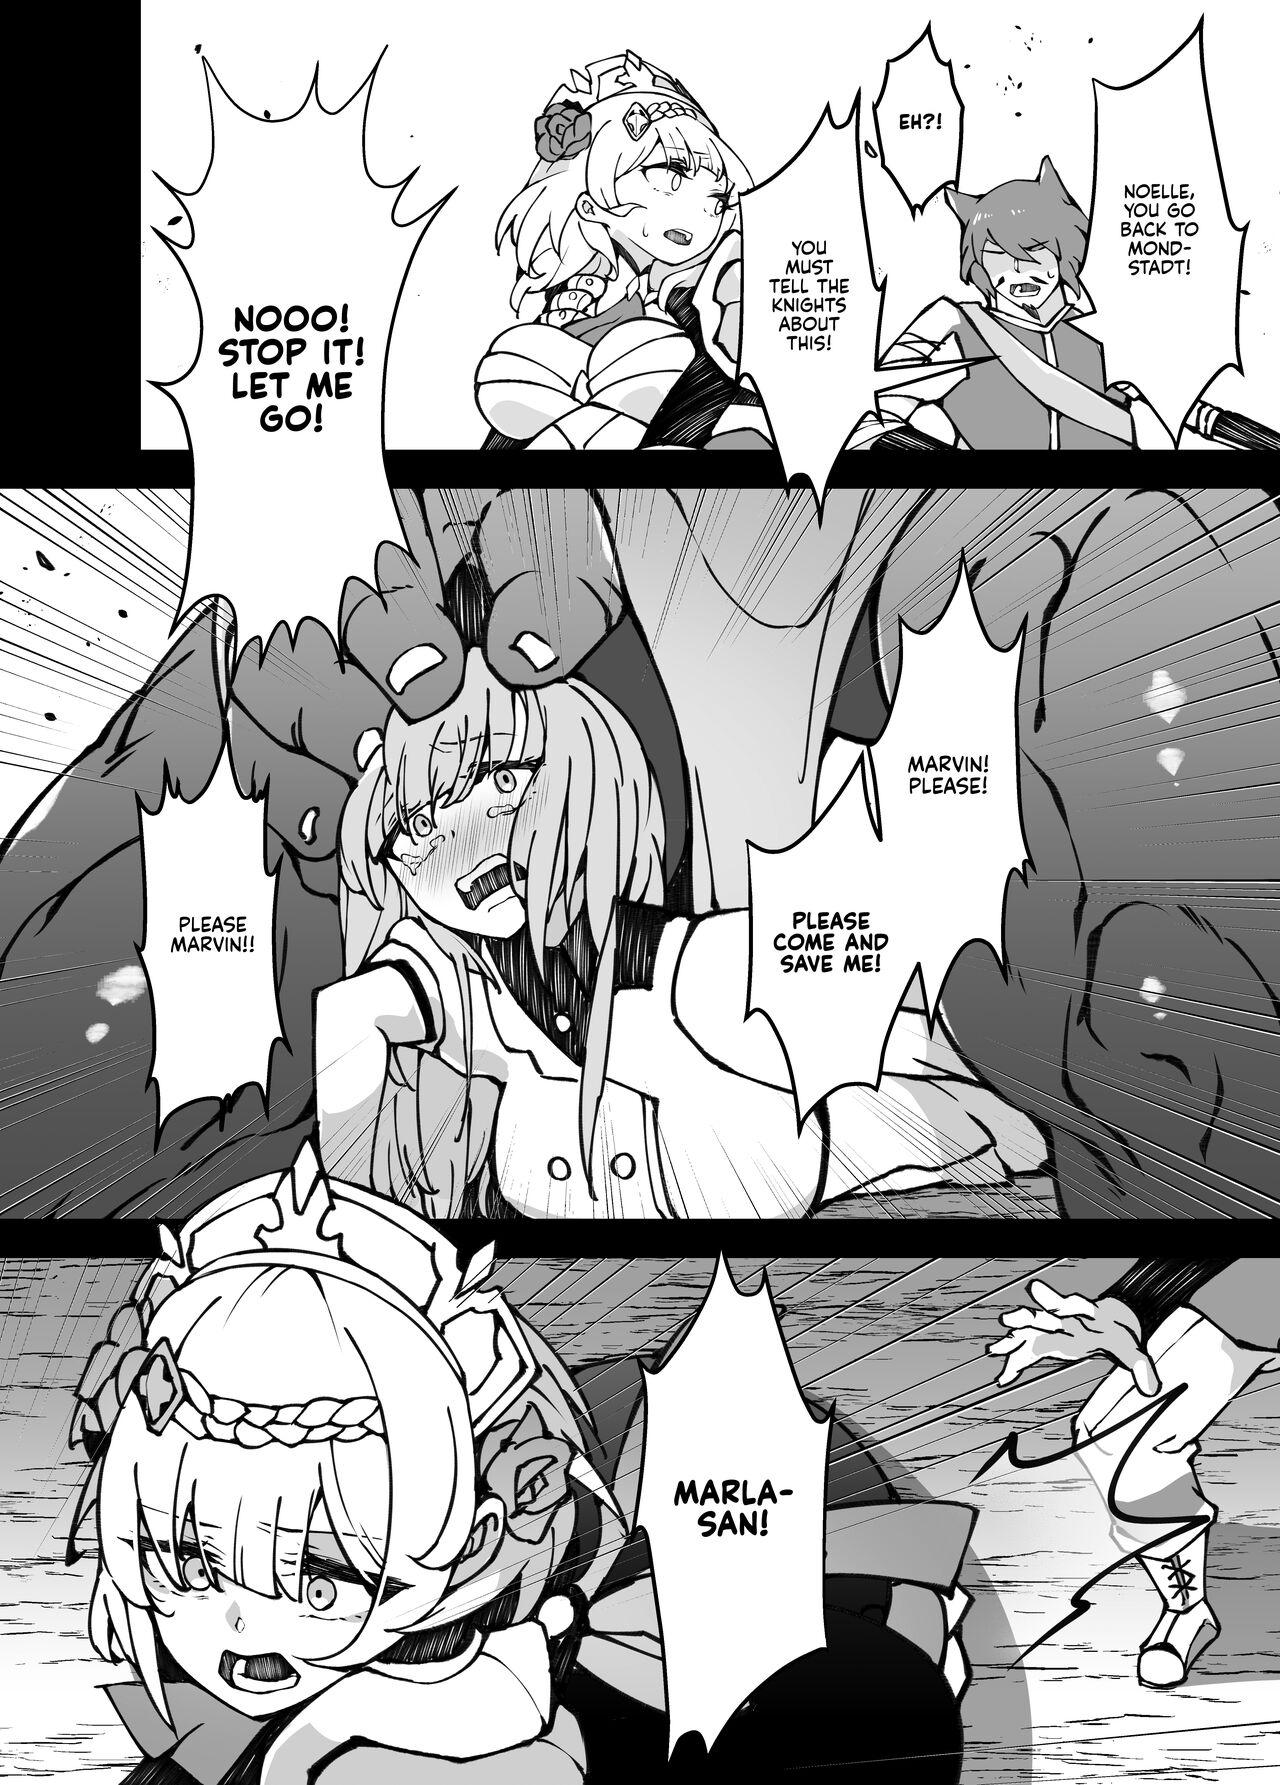 Futa [Karouke (Karou)] The Attack of the Hilichurls II ~The Invasion's Prelude~ Noelle,Chivalric Blossom that withered~ (Genshin Impact) [English] [Kyuume] [Digital] - Genshin impact Perfect Tits - Page 11